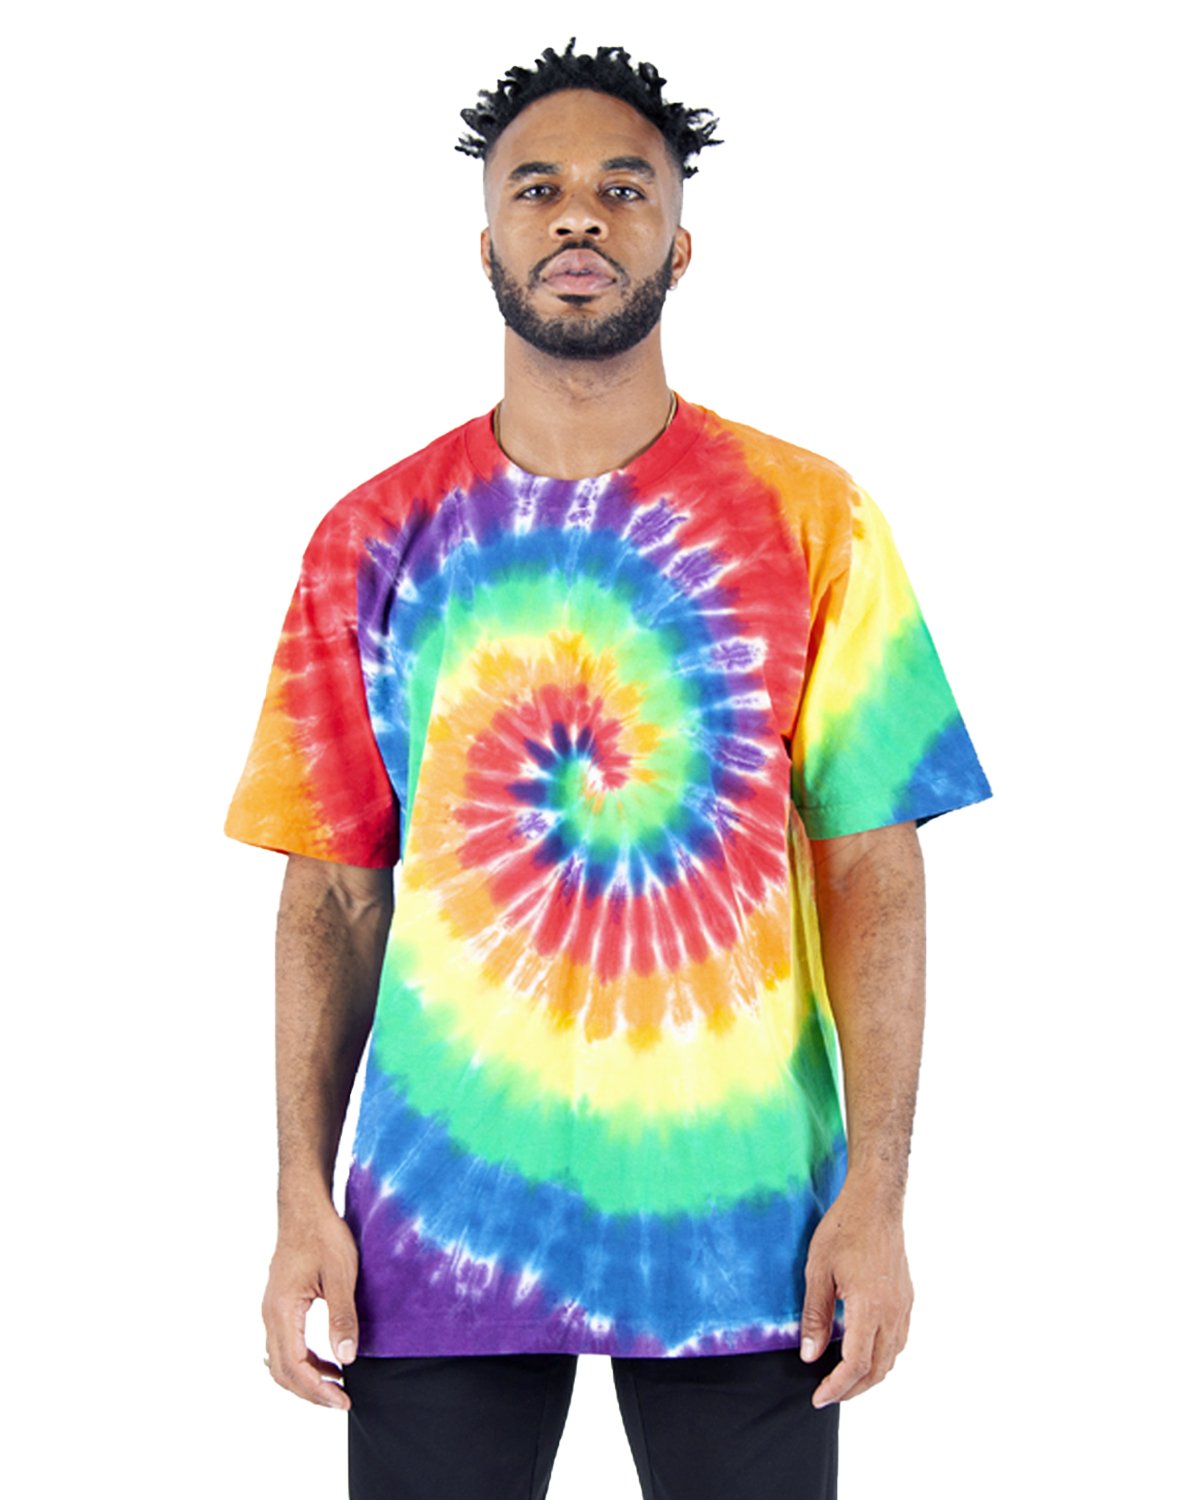 How to wash a tie dye shirt?